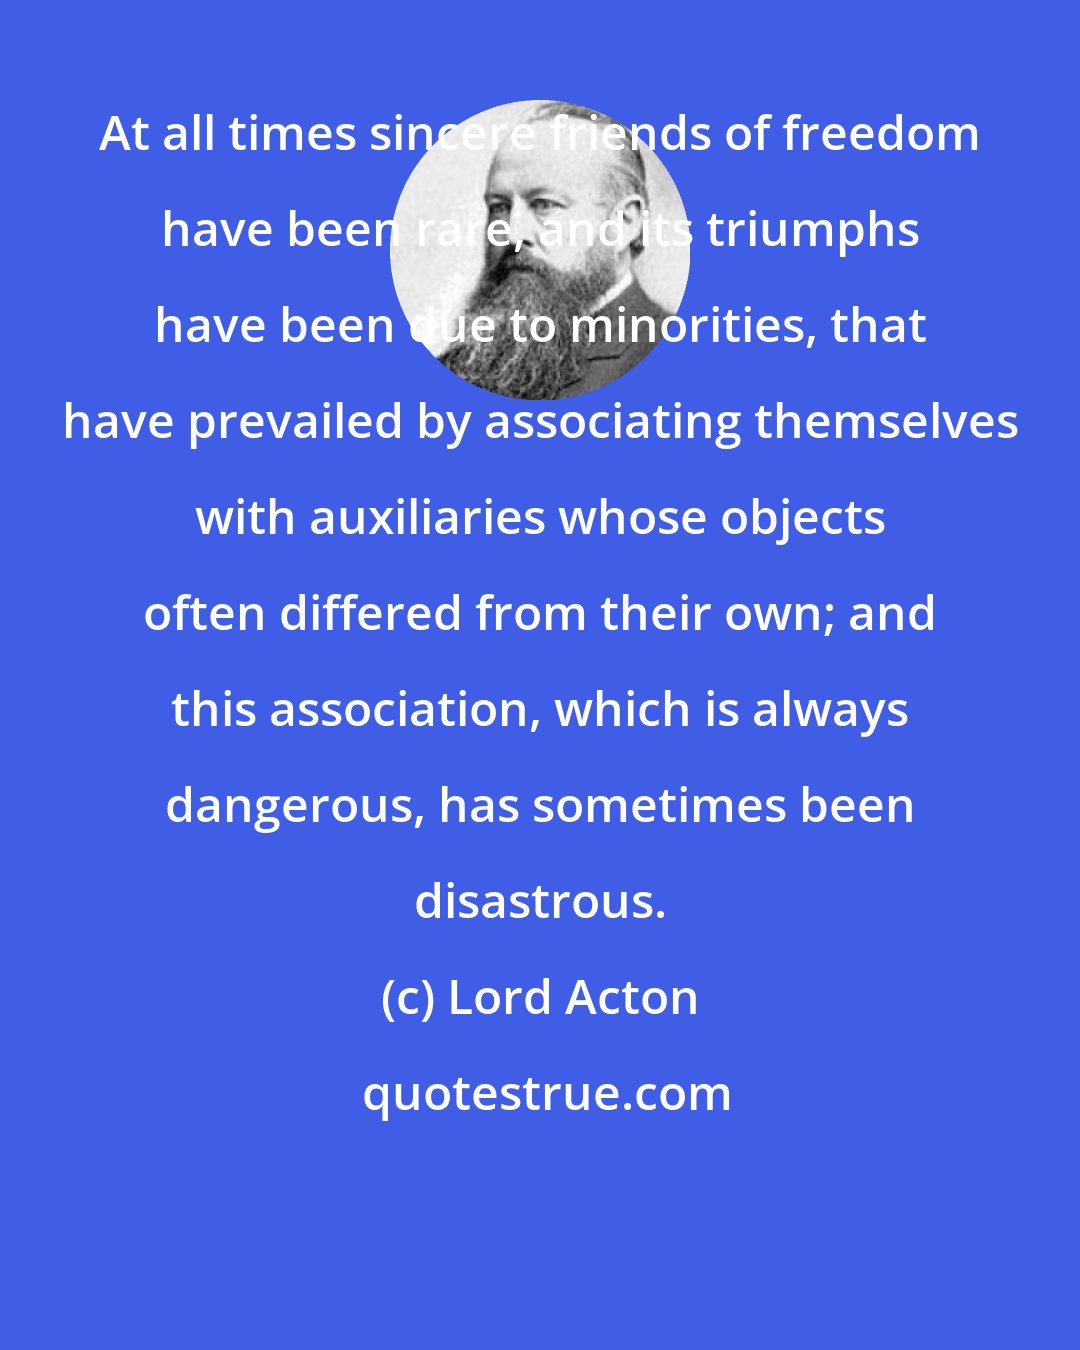 Lord Acton: At all times sincere friends of freedom have been rare, and its triumphs have been due to minorities, that have prevailed by associating themselves with auxiliaries whose objects often differed from their own; and this association, which is always dangerous, has sometimes been disastrous.